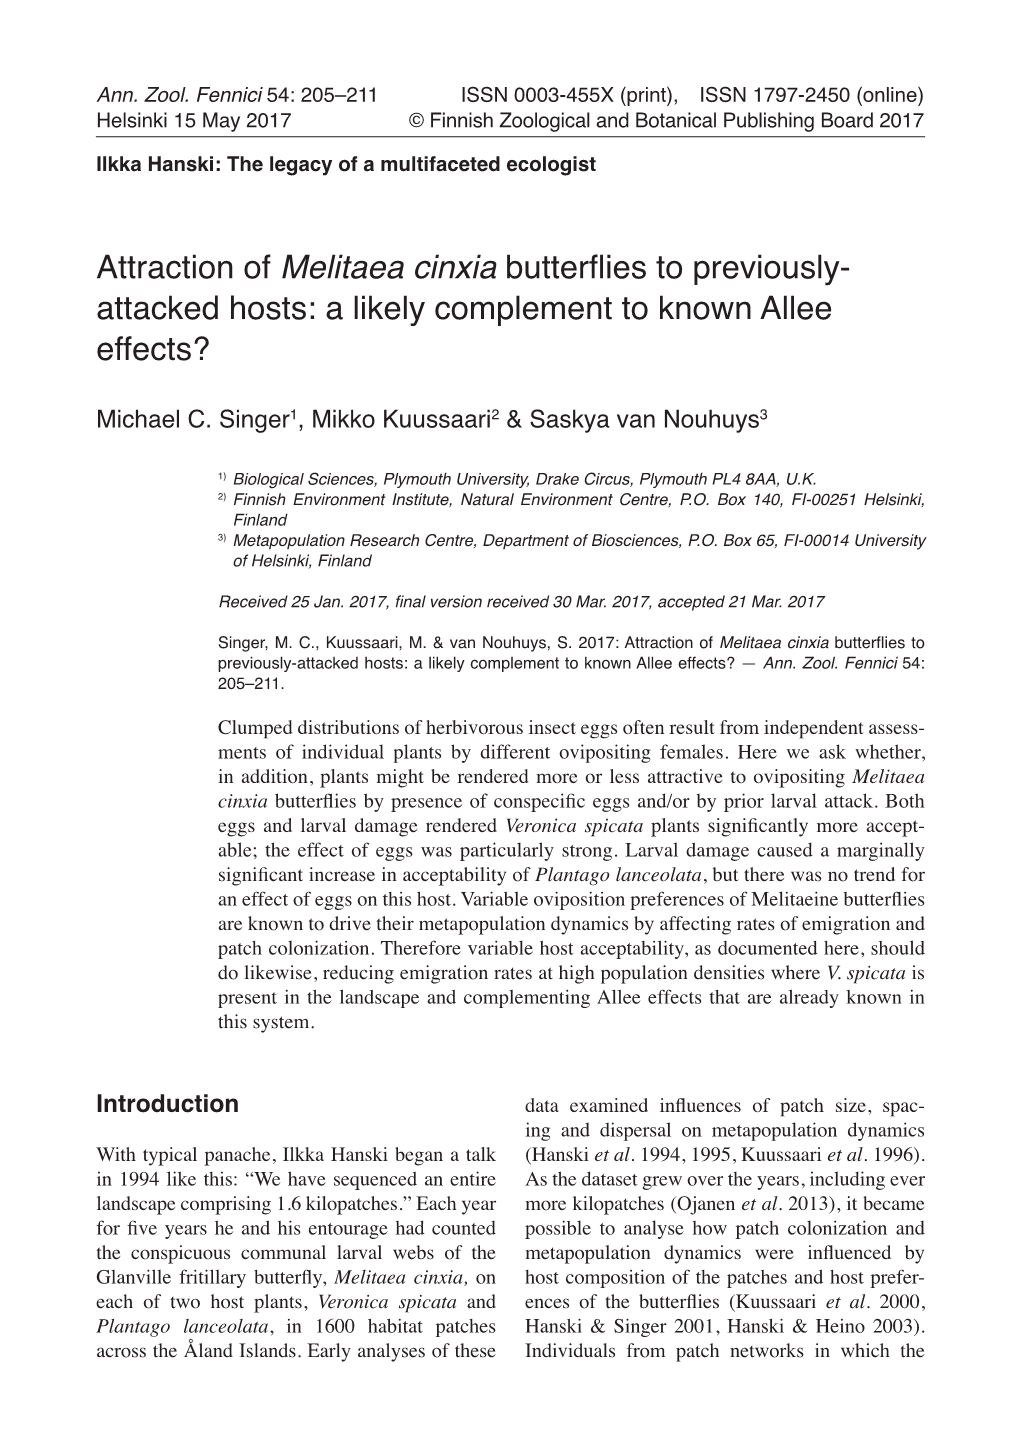 Attraction of Melitaea Cinxia Butterflies to Previously- Attacked Hosts: a Likely Complement to Known Allee Effects?